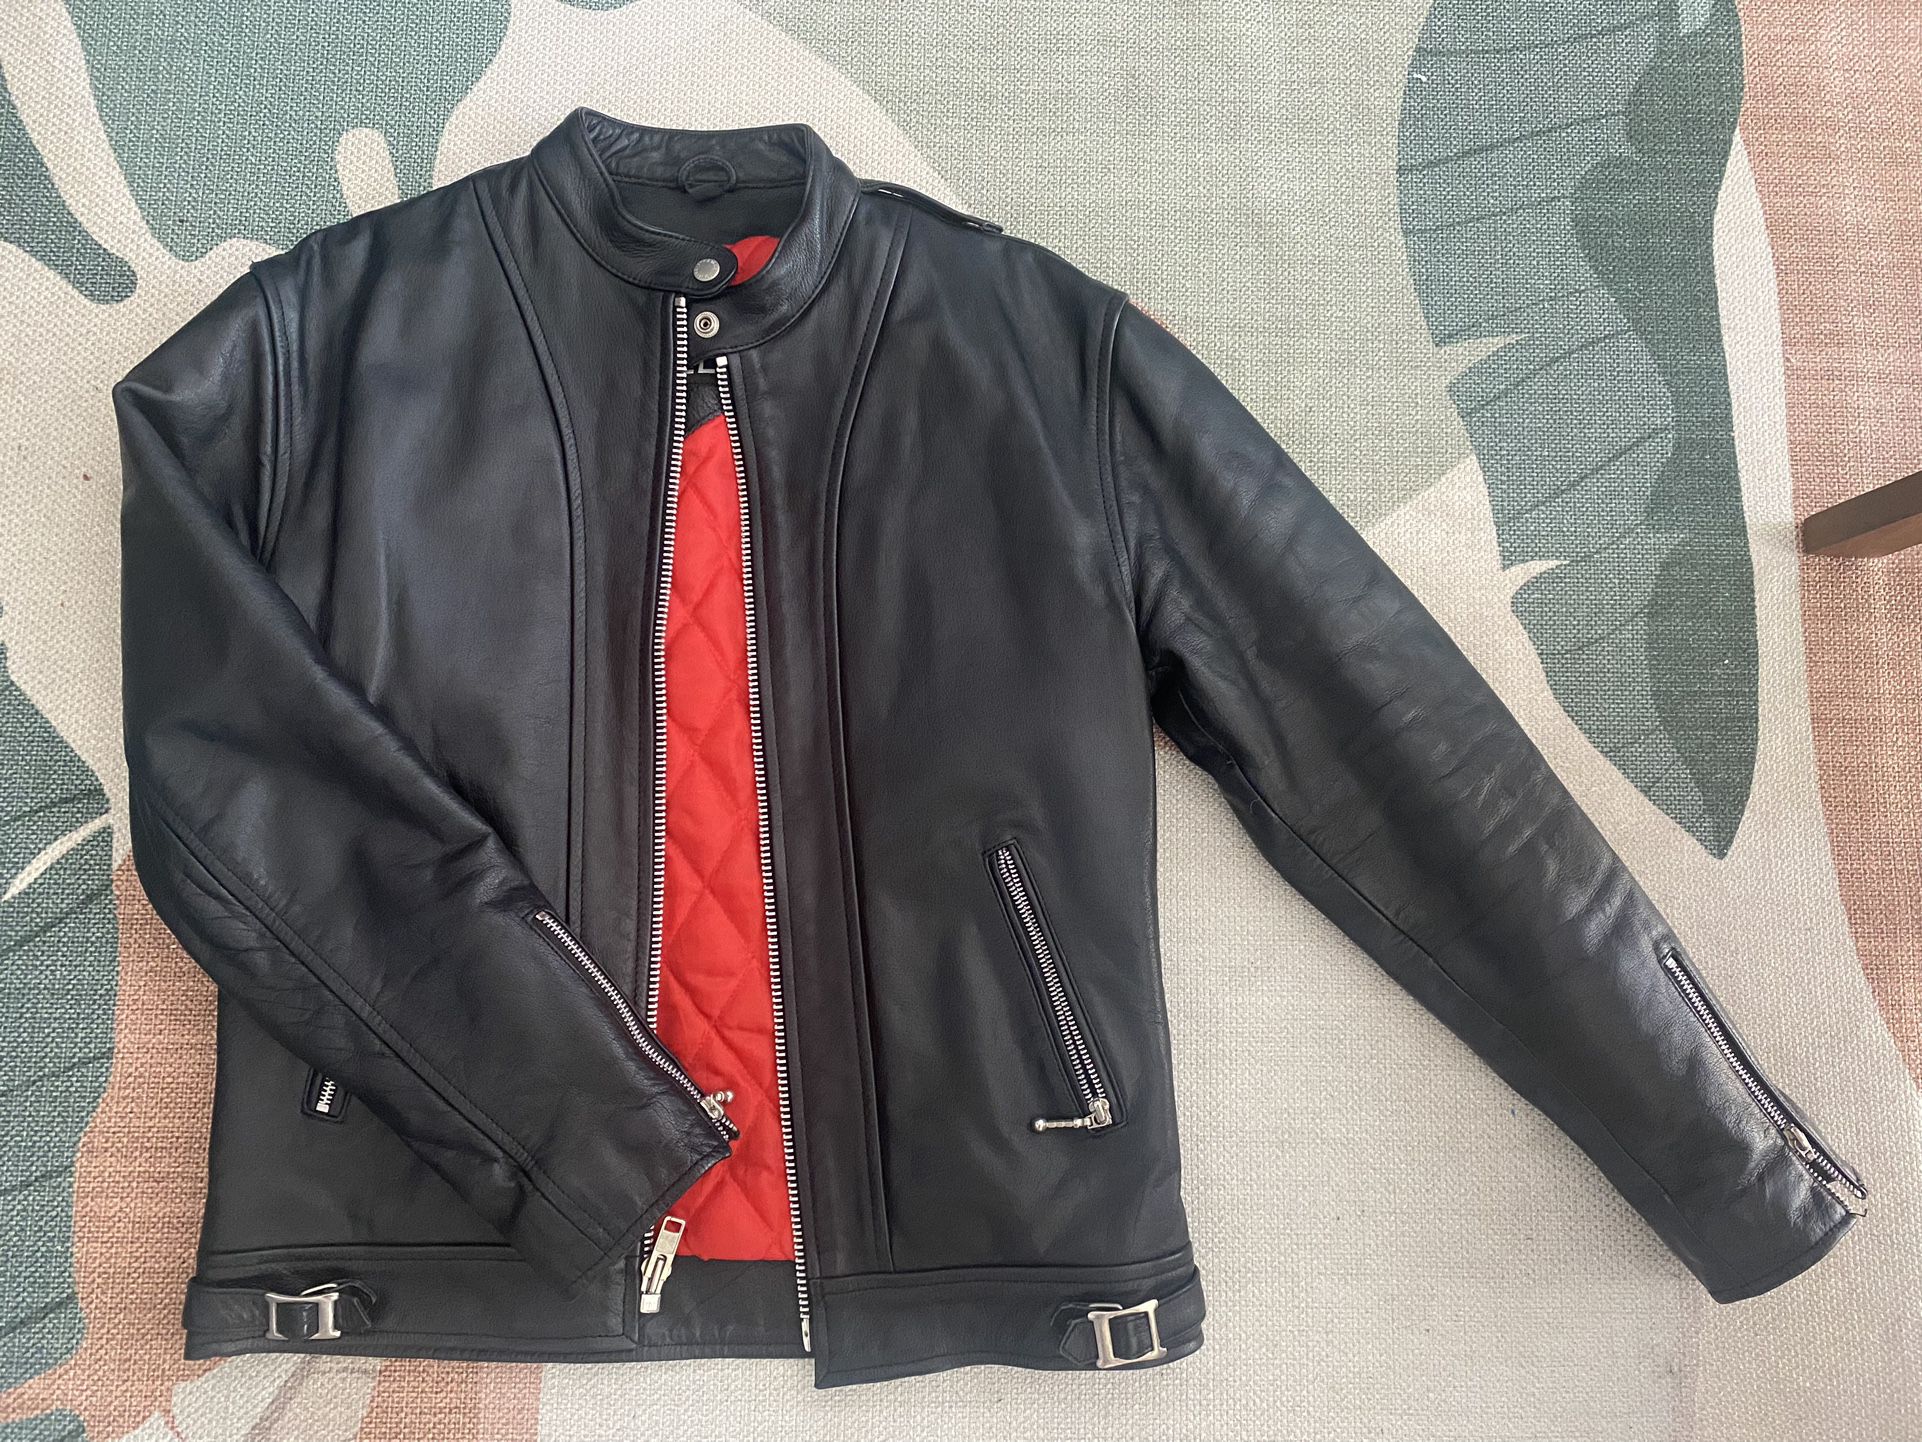 Straight To Hell Leather Jacket